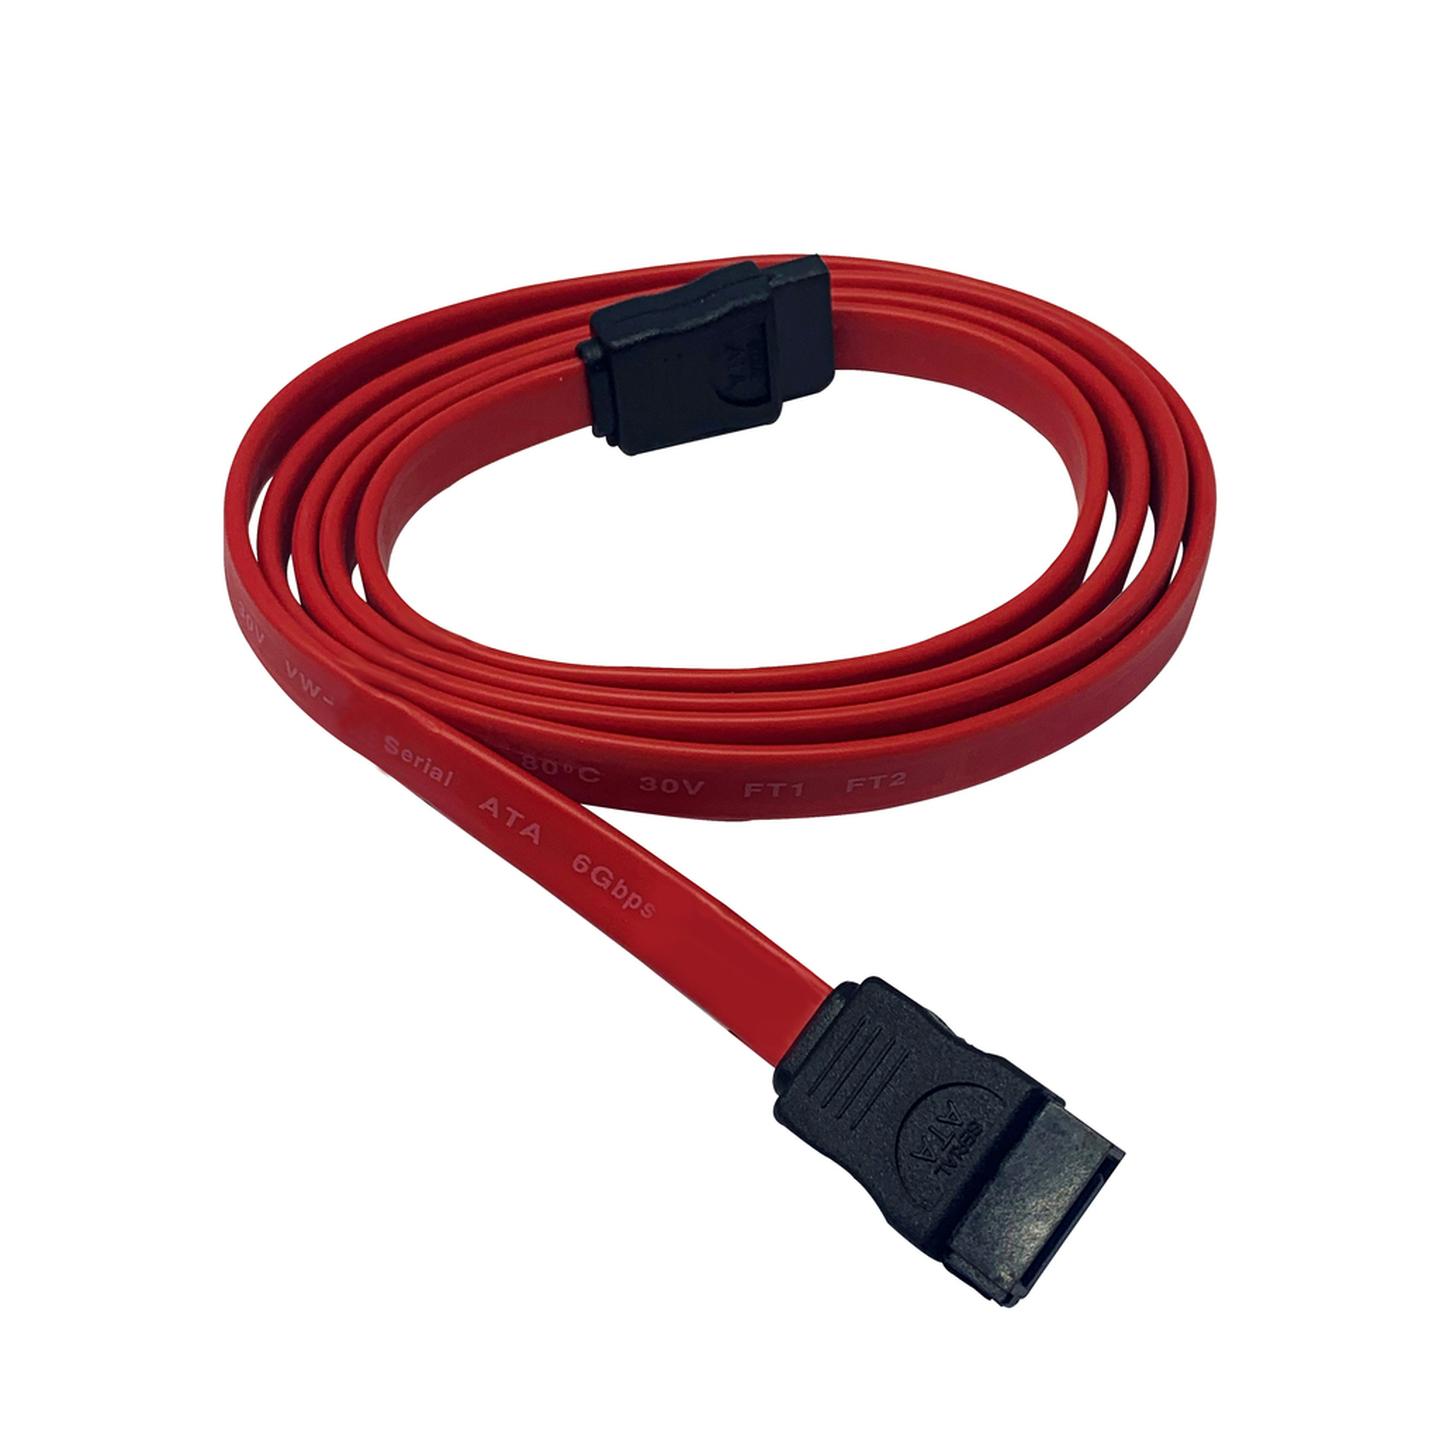 1m 7pin female to 7 pin female SATA Cable